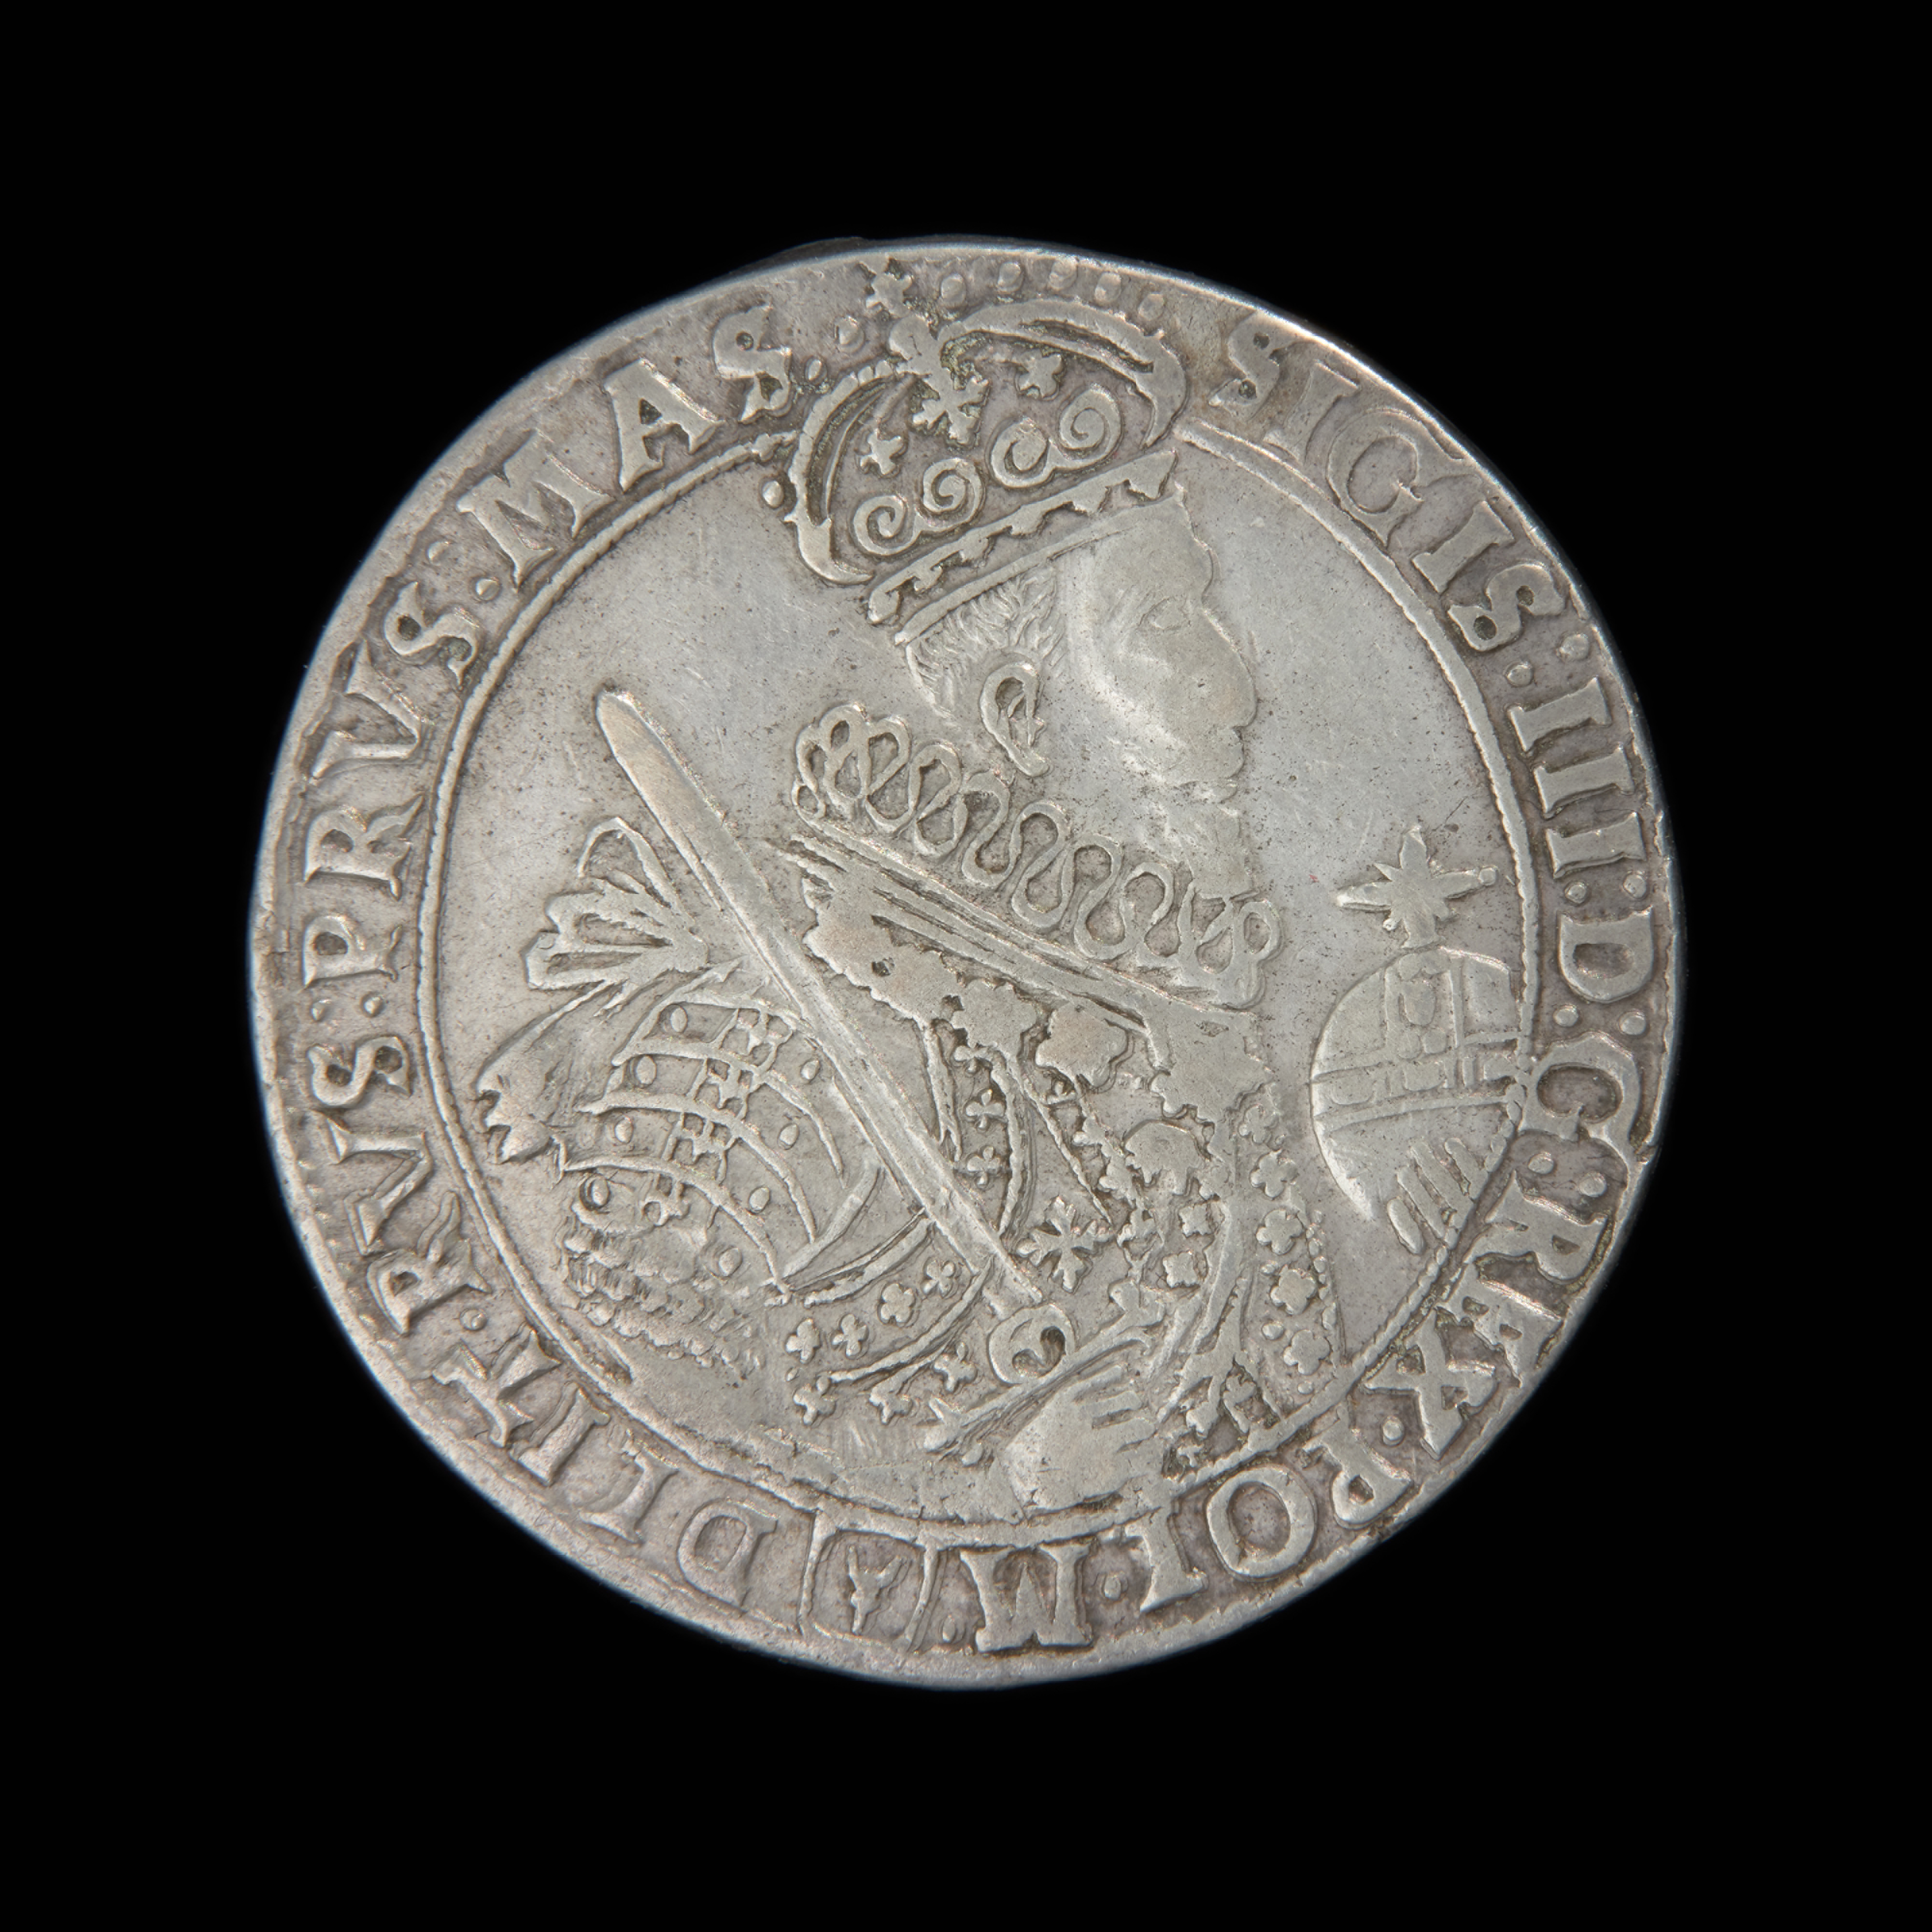 Thaler MNS/N/14958 – In museums